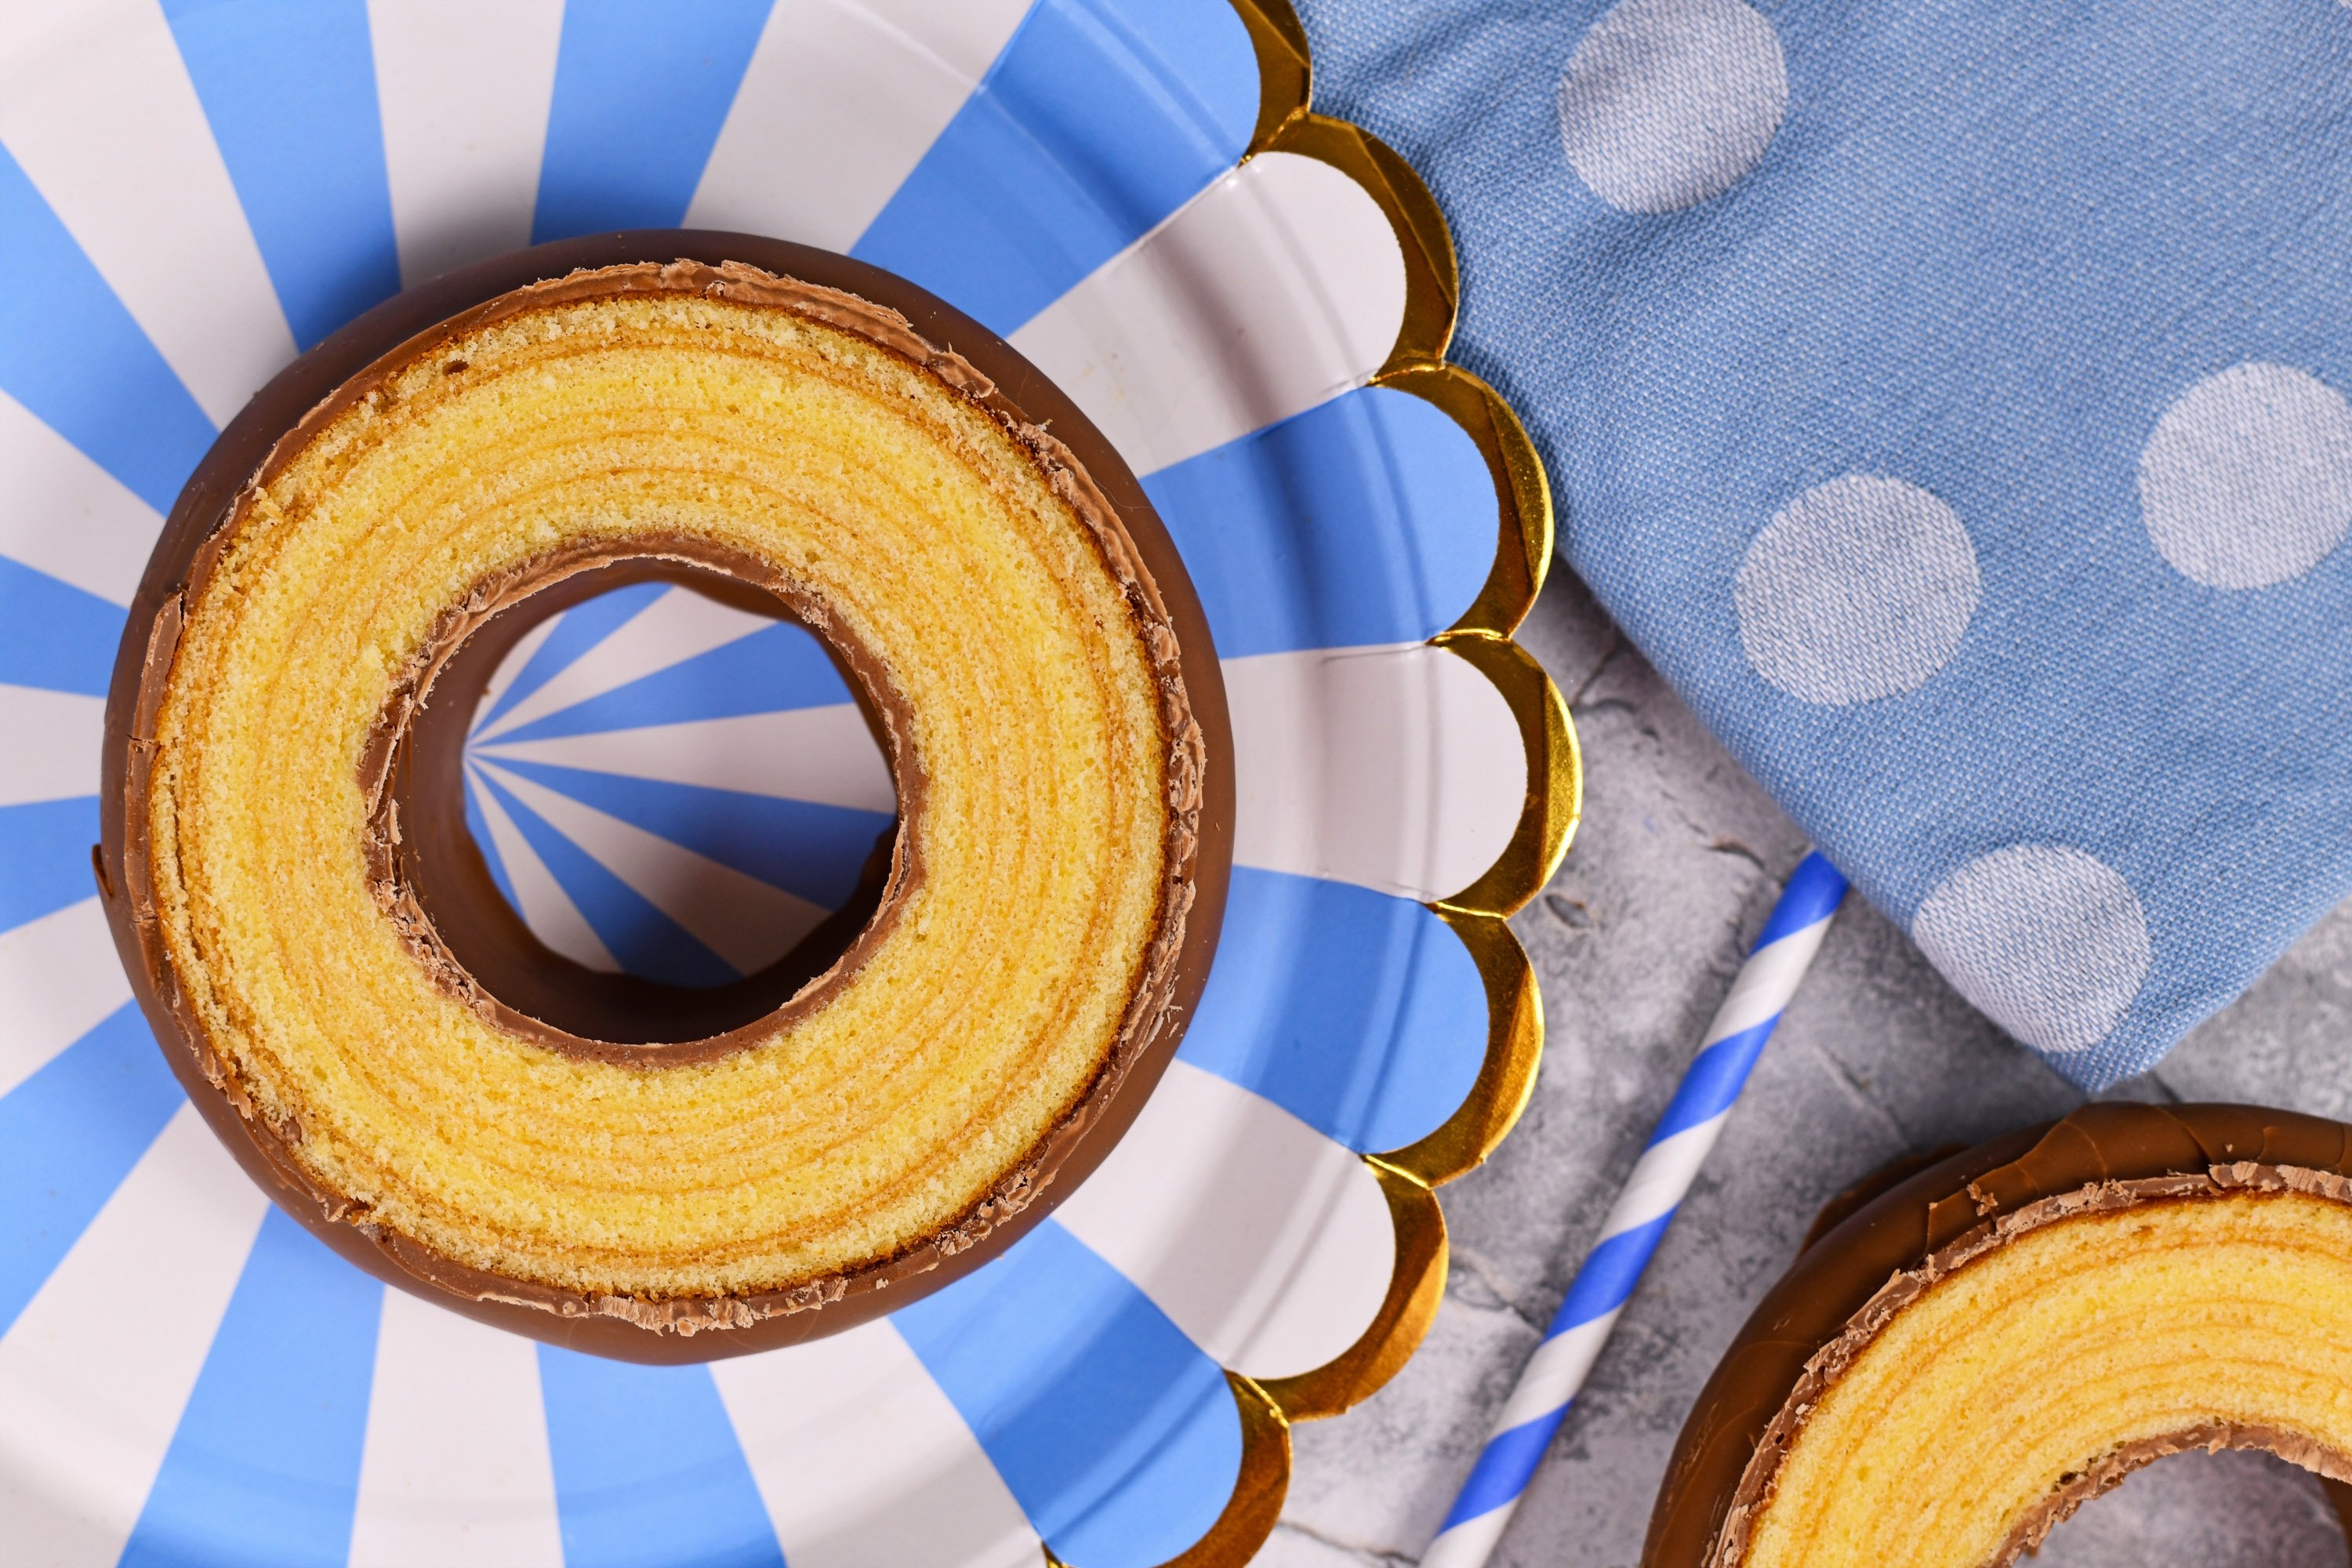 Patience solidified: Baumkuchen, the German layered &amp;#39;tree cake&amp;#39; | Daily ...